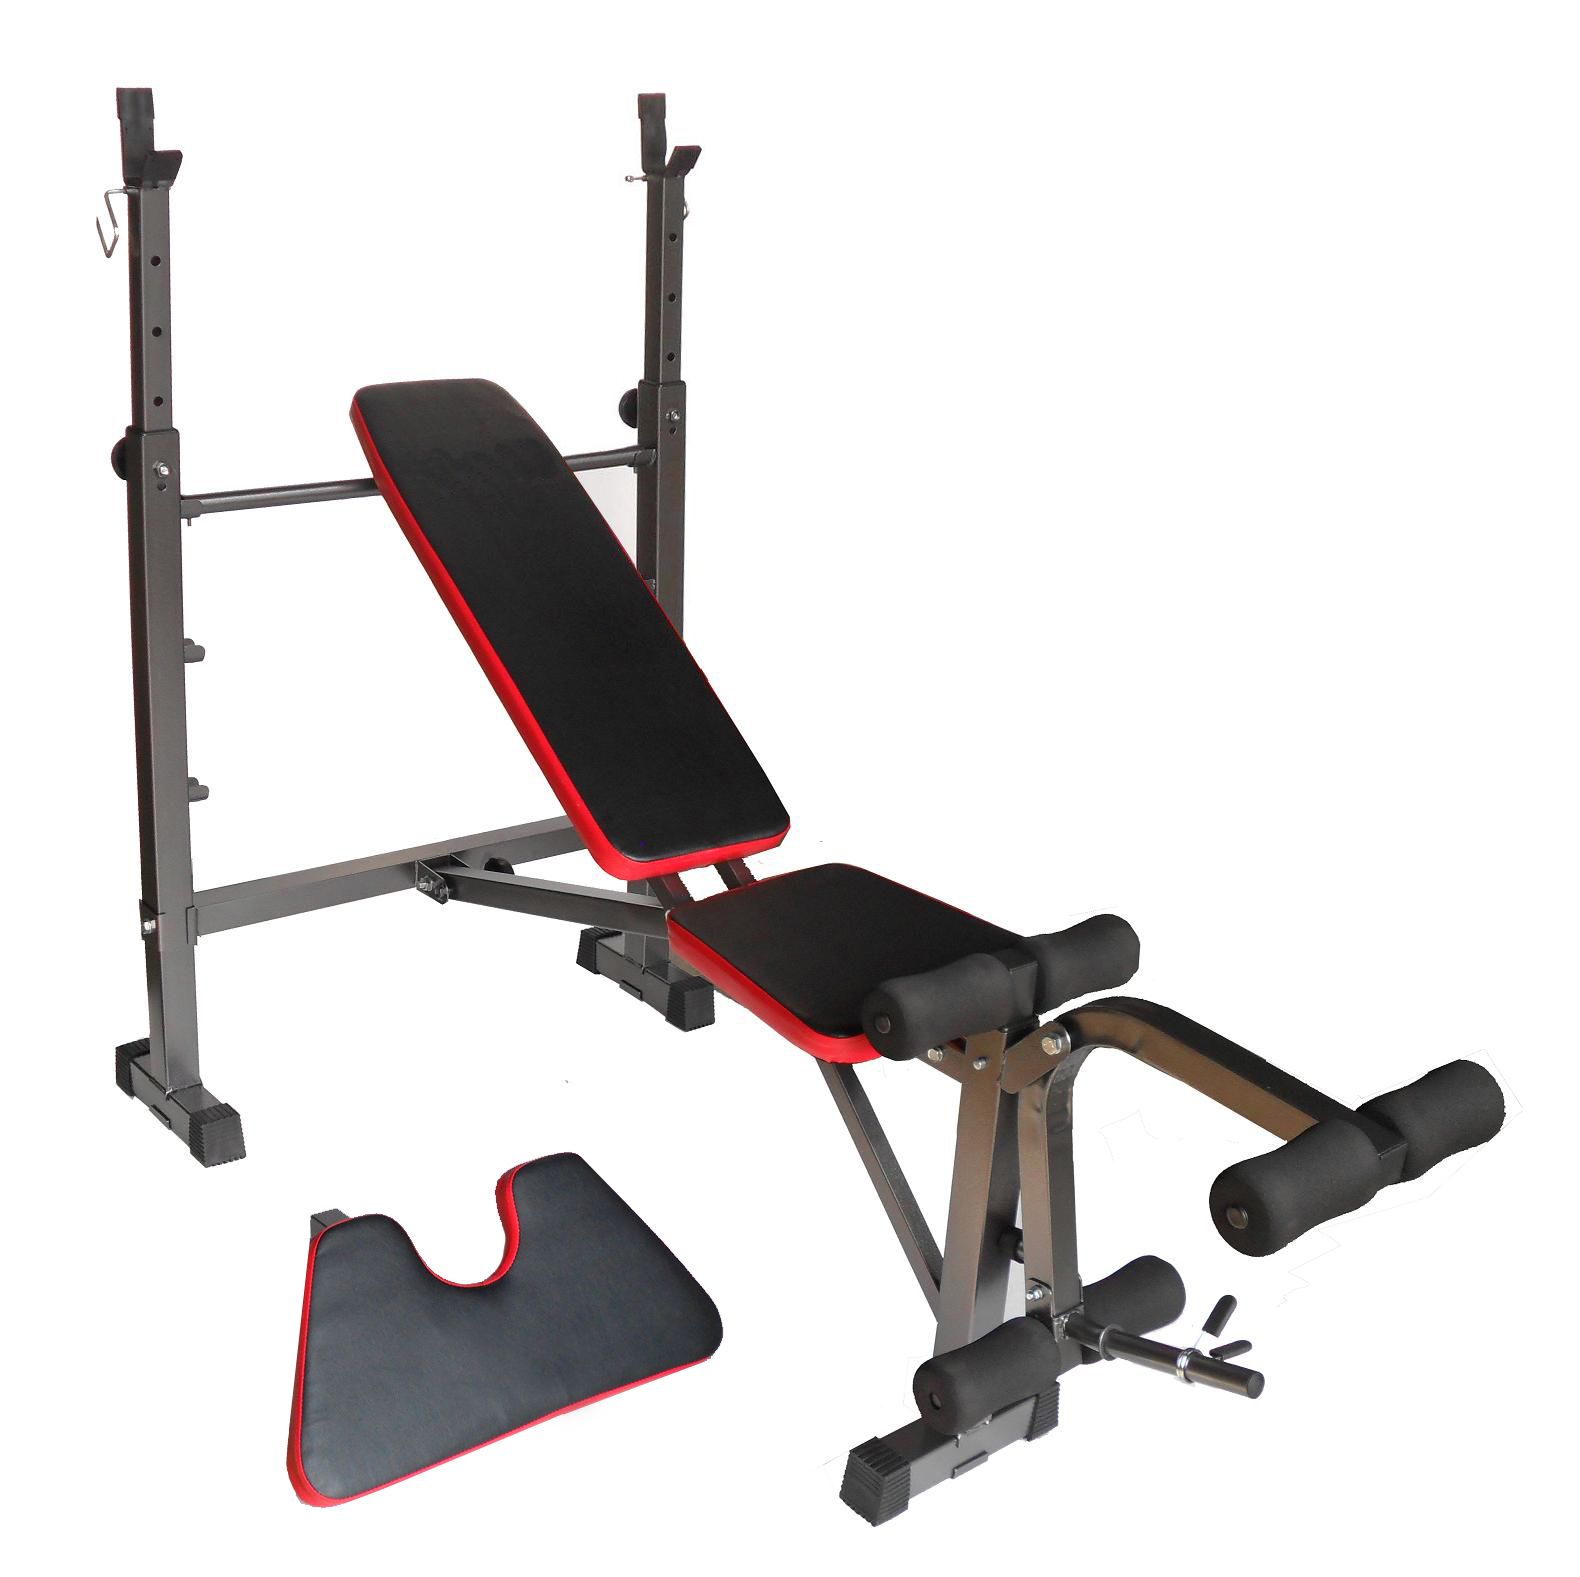 RB-16003 Weight Bench